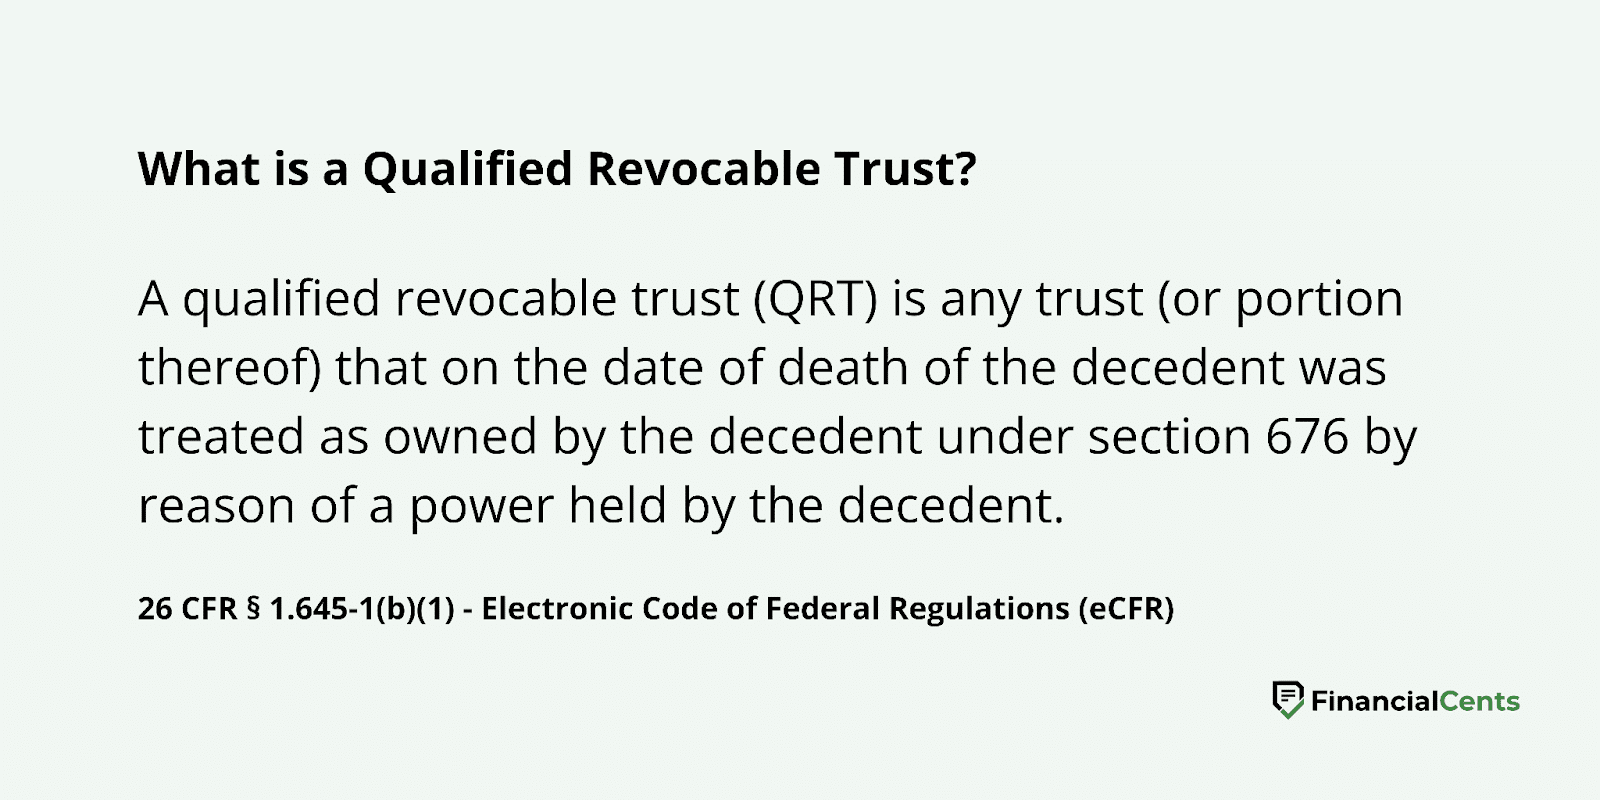 form 8855: definition of a qualified revocable trust